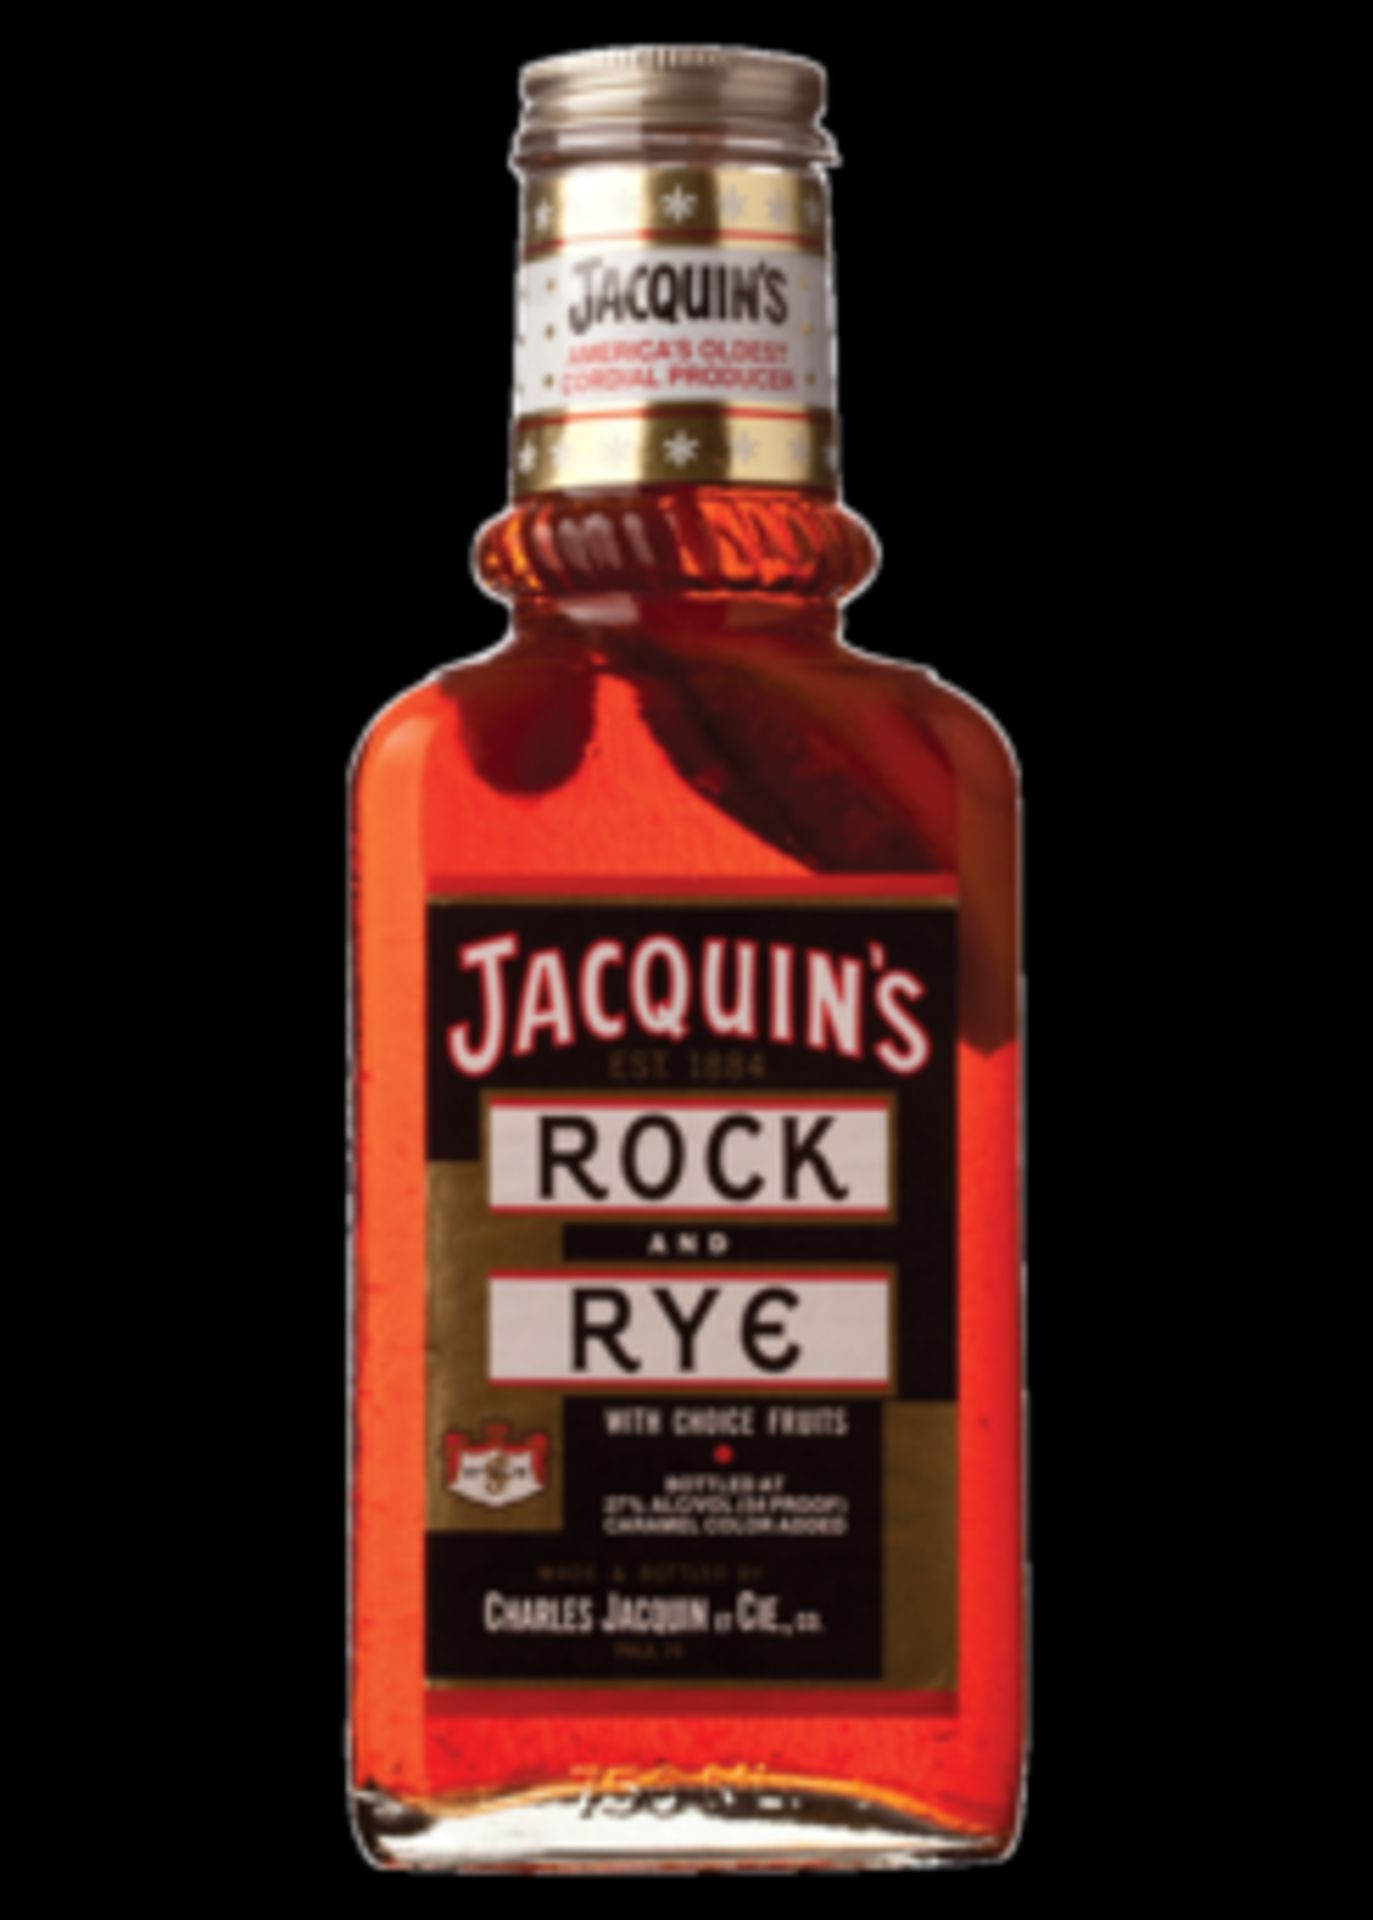 V Brand New Rock and Rye Whisky - 75cl - Jacquins Rock & Rye American Whiskey - 40% Alchol 80